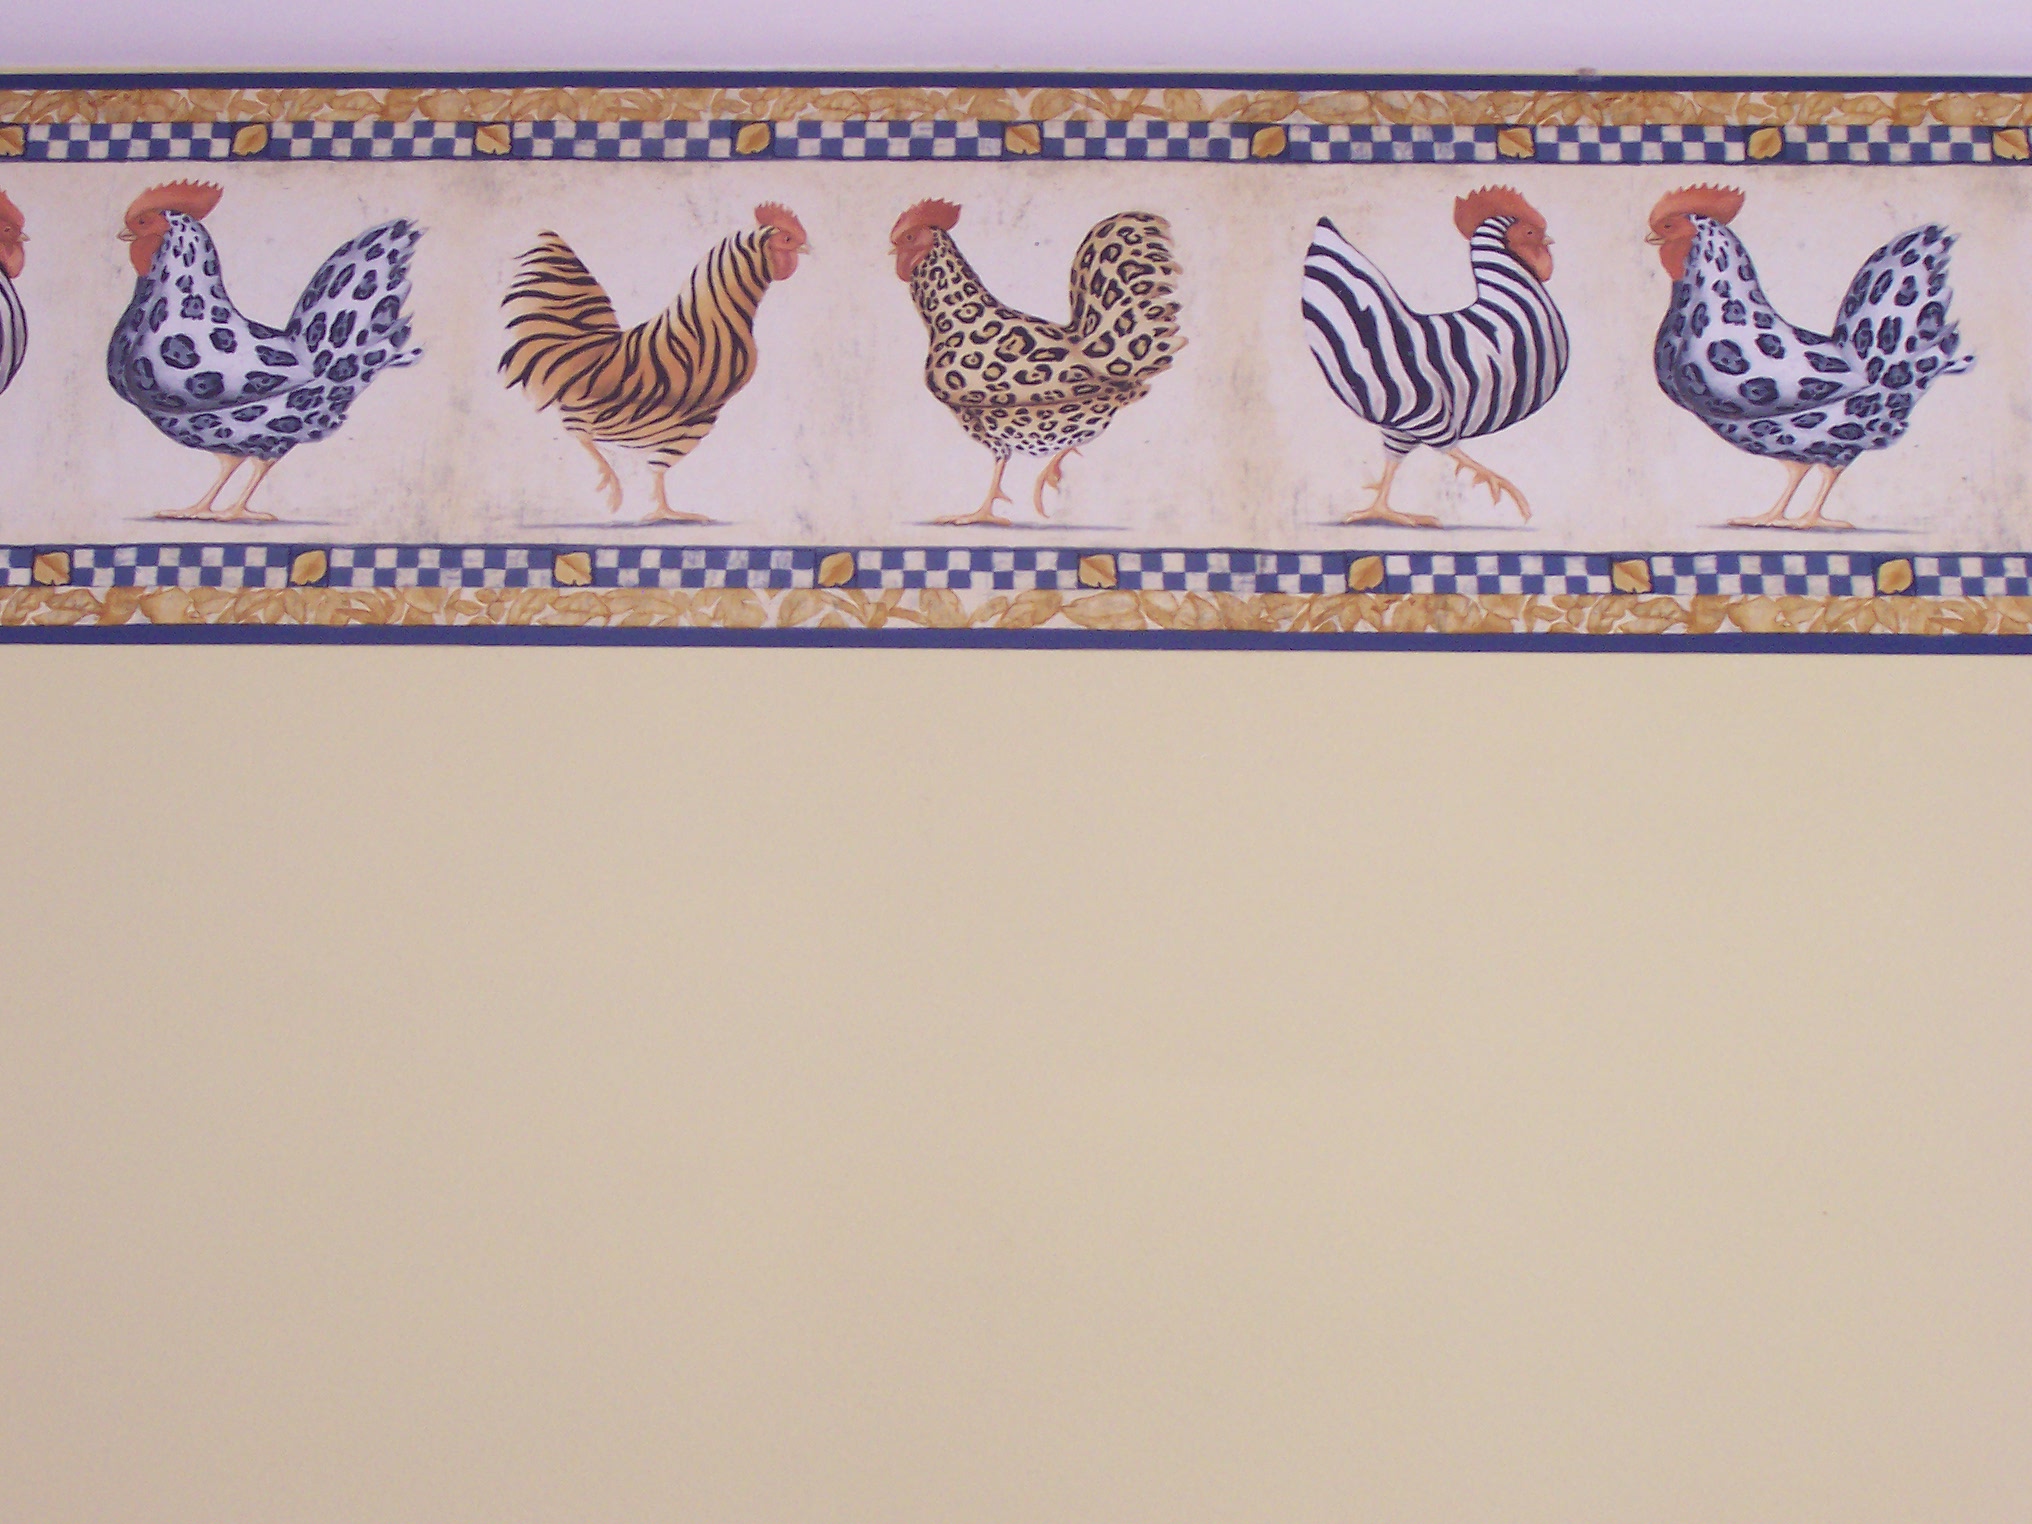  with white trim, and a snazzy border of animal print roosters!